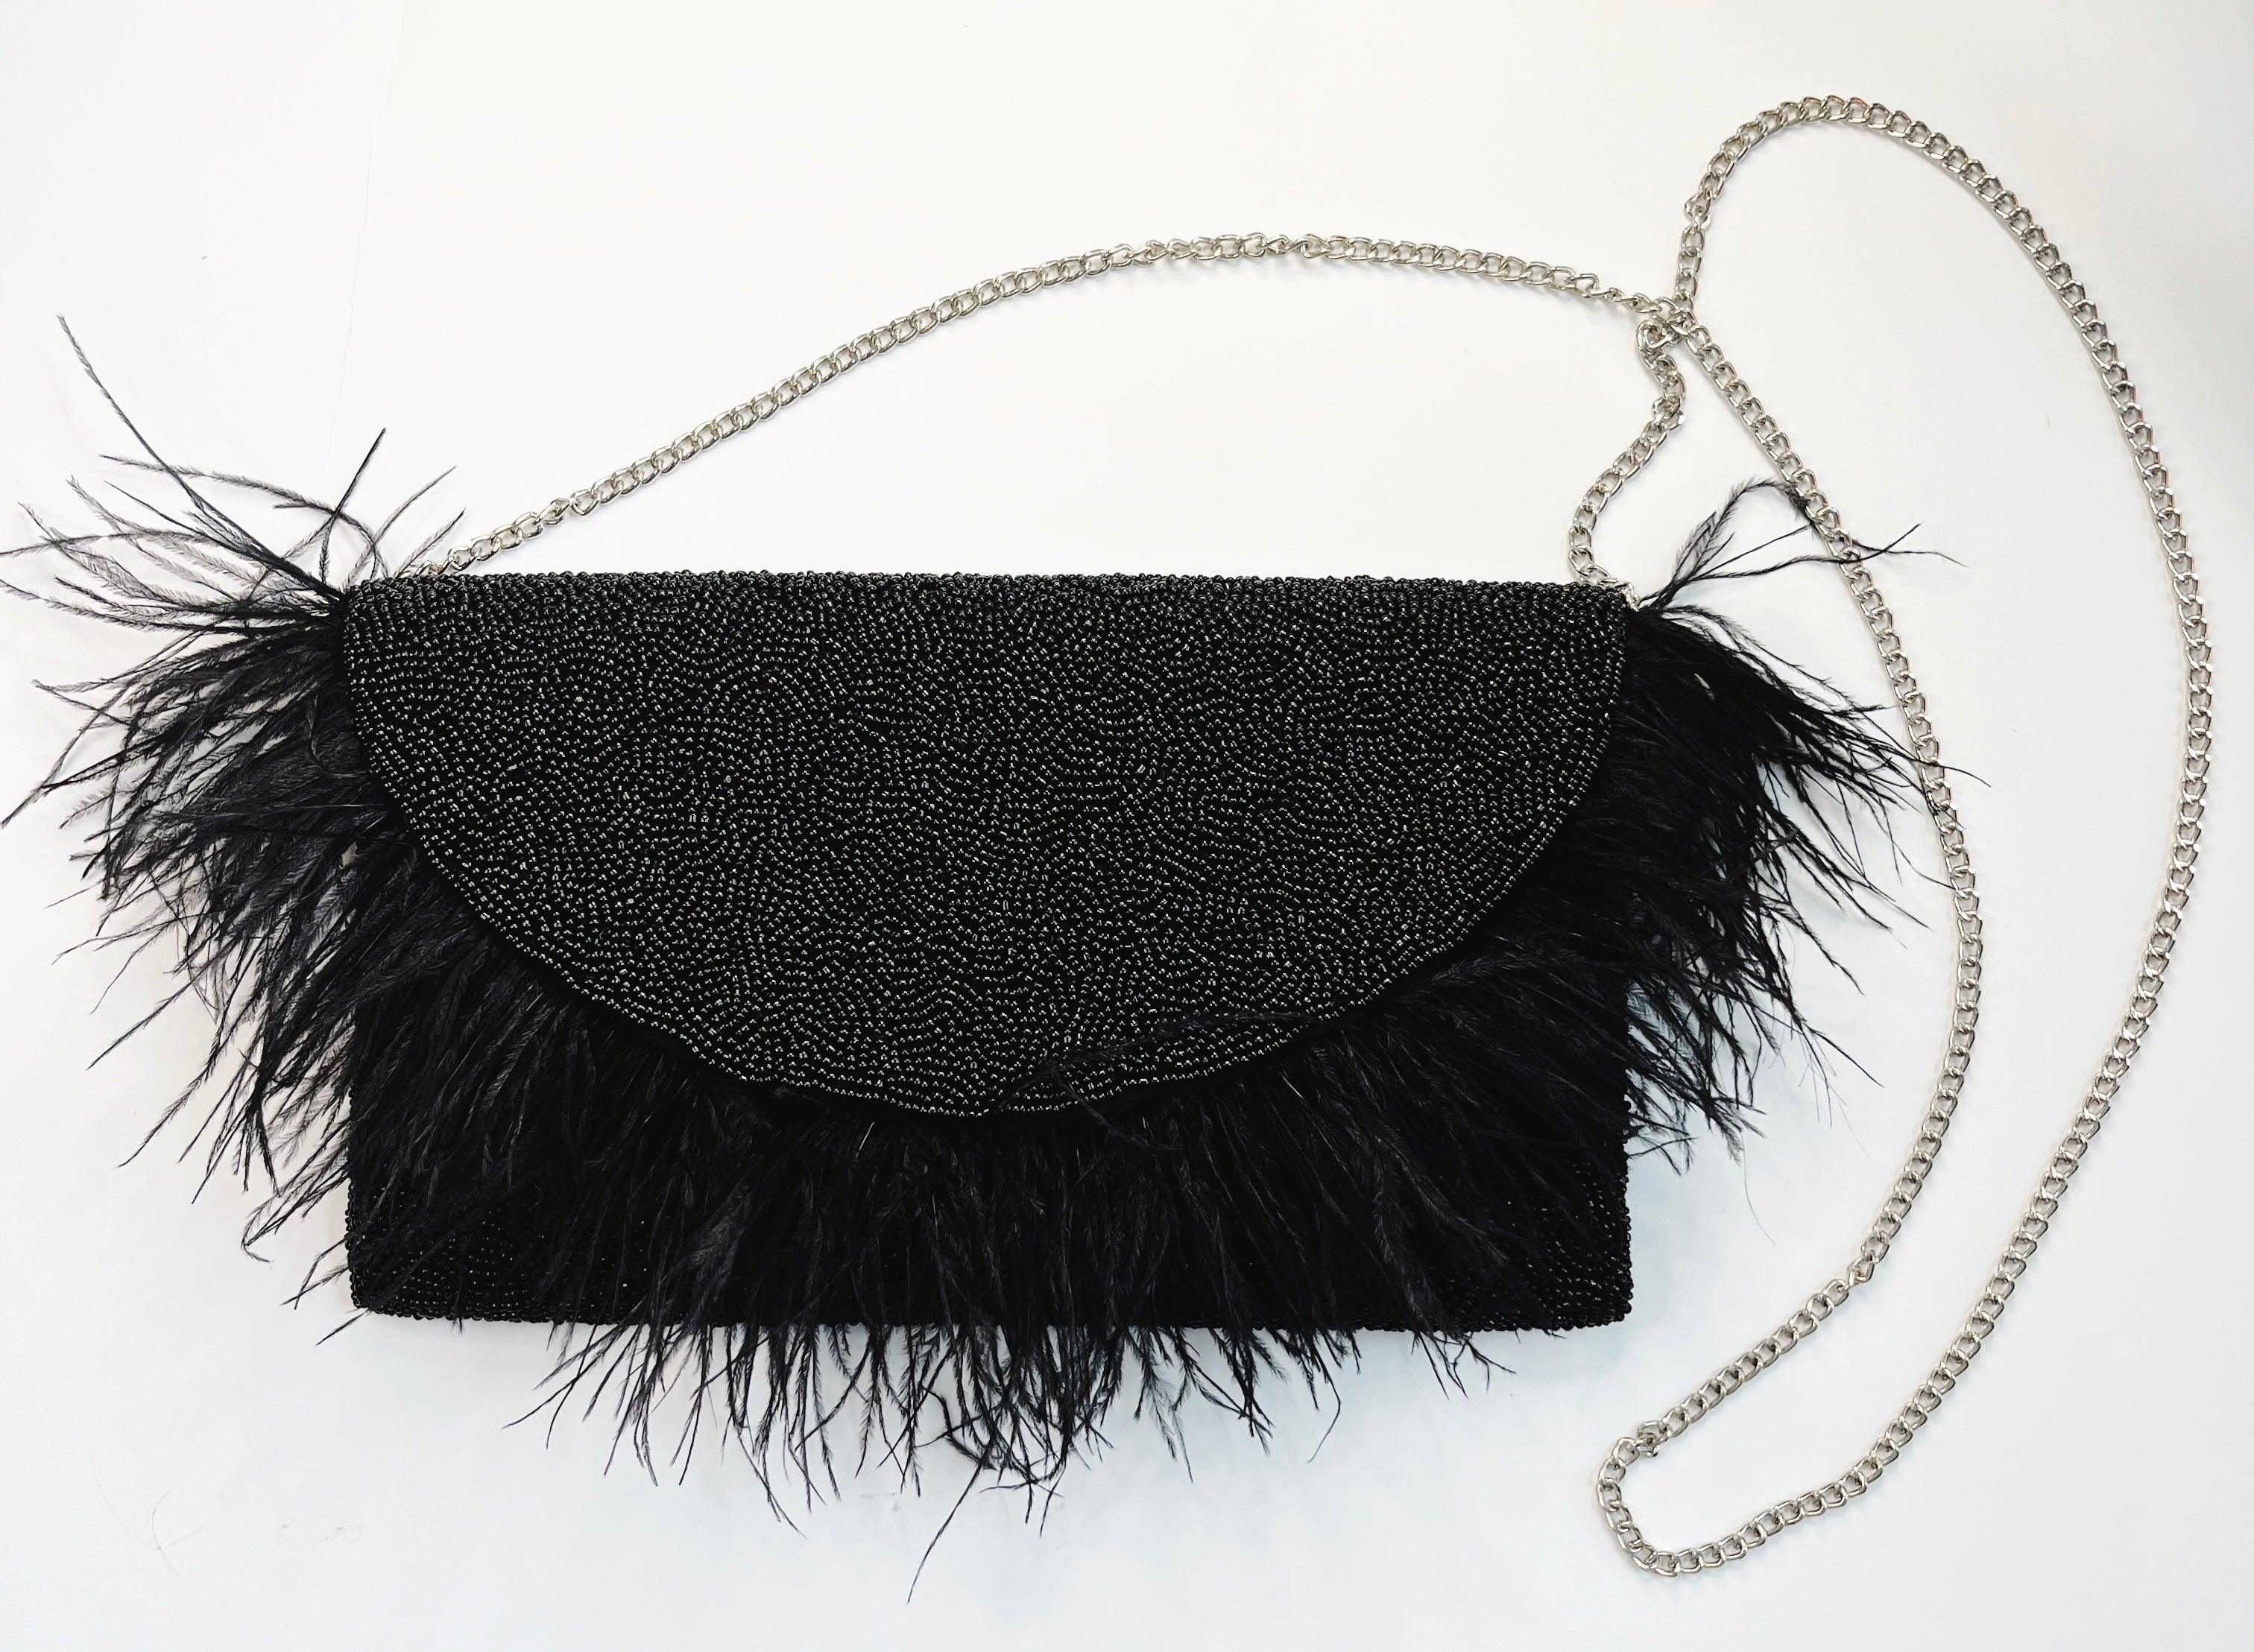 The Black Beaded Party Clutch - Mkay Style